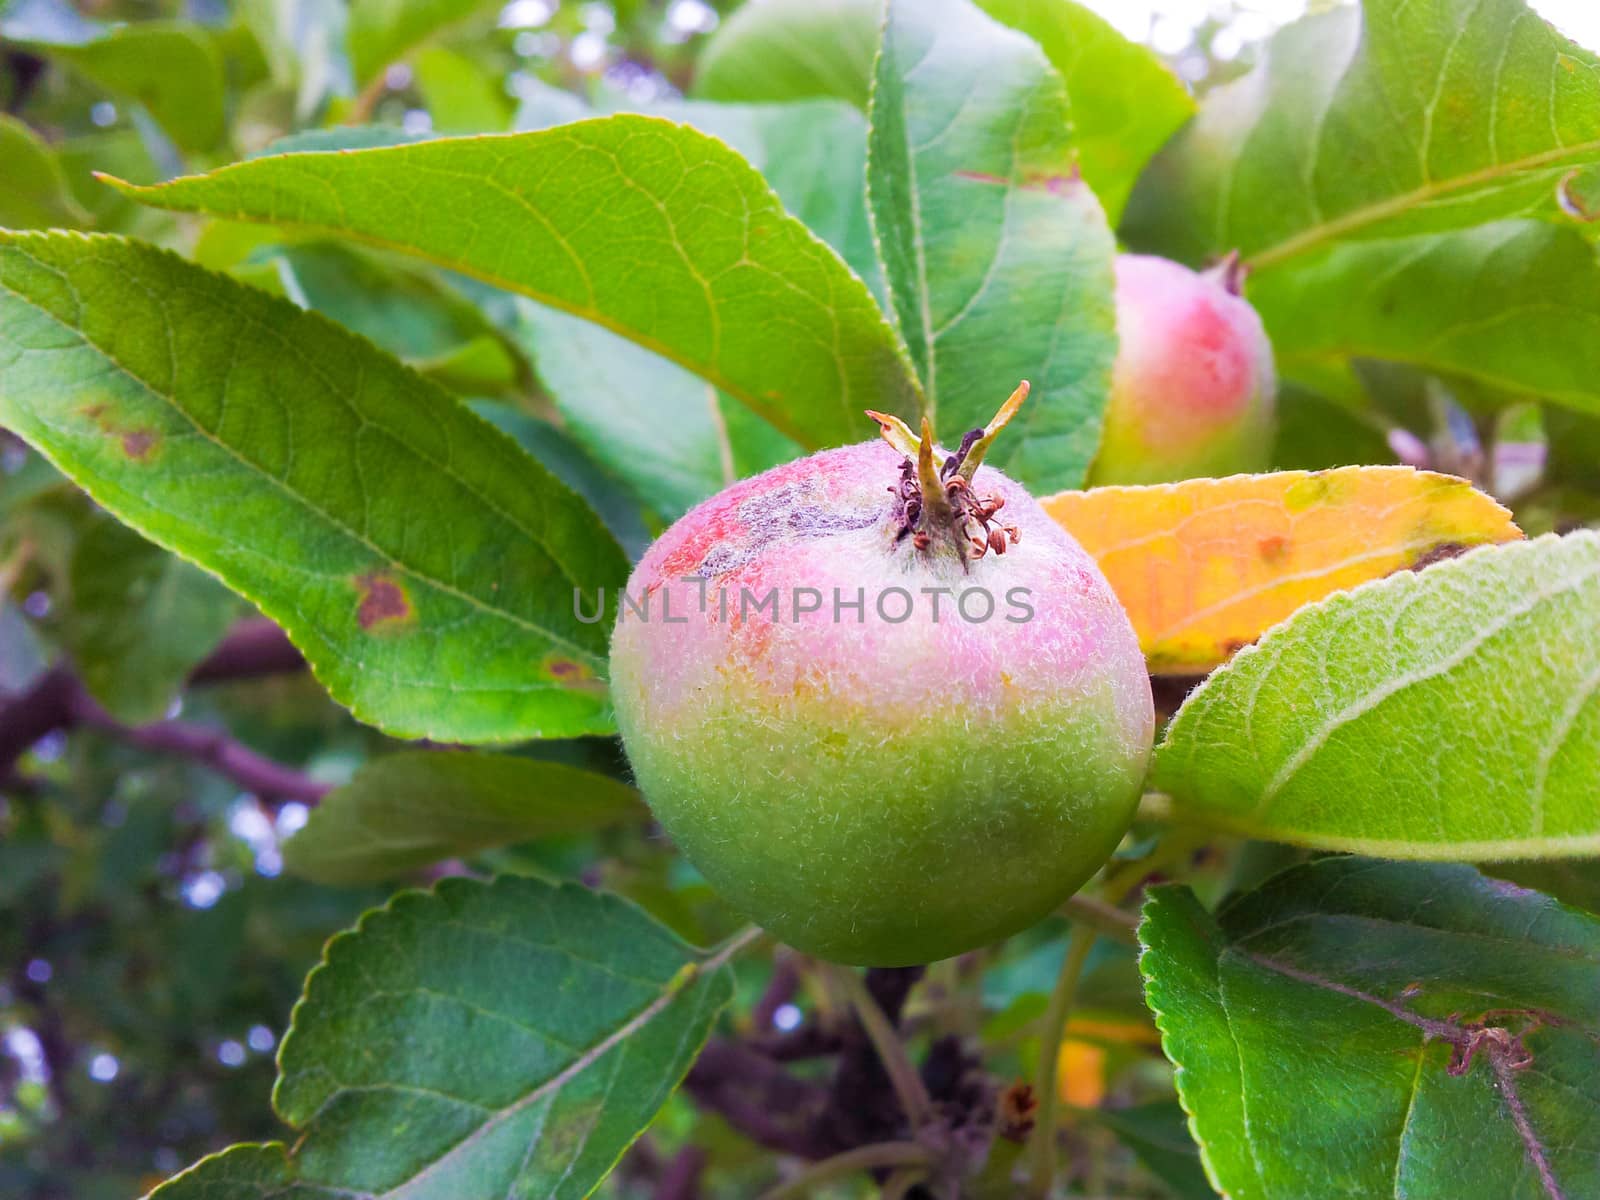 Uncultivated little red and green apple ripe on tree